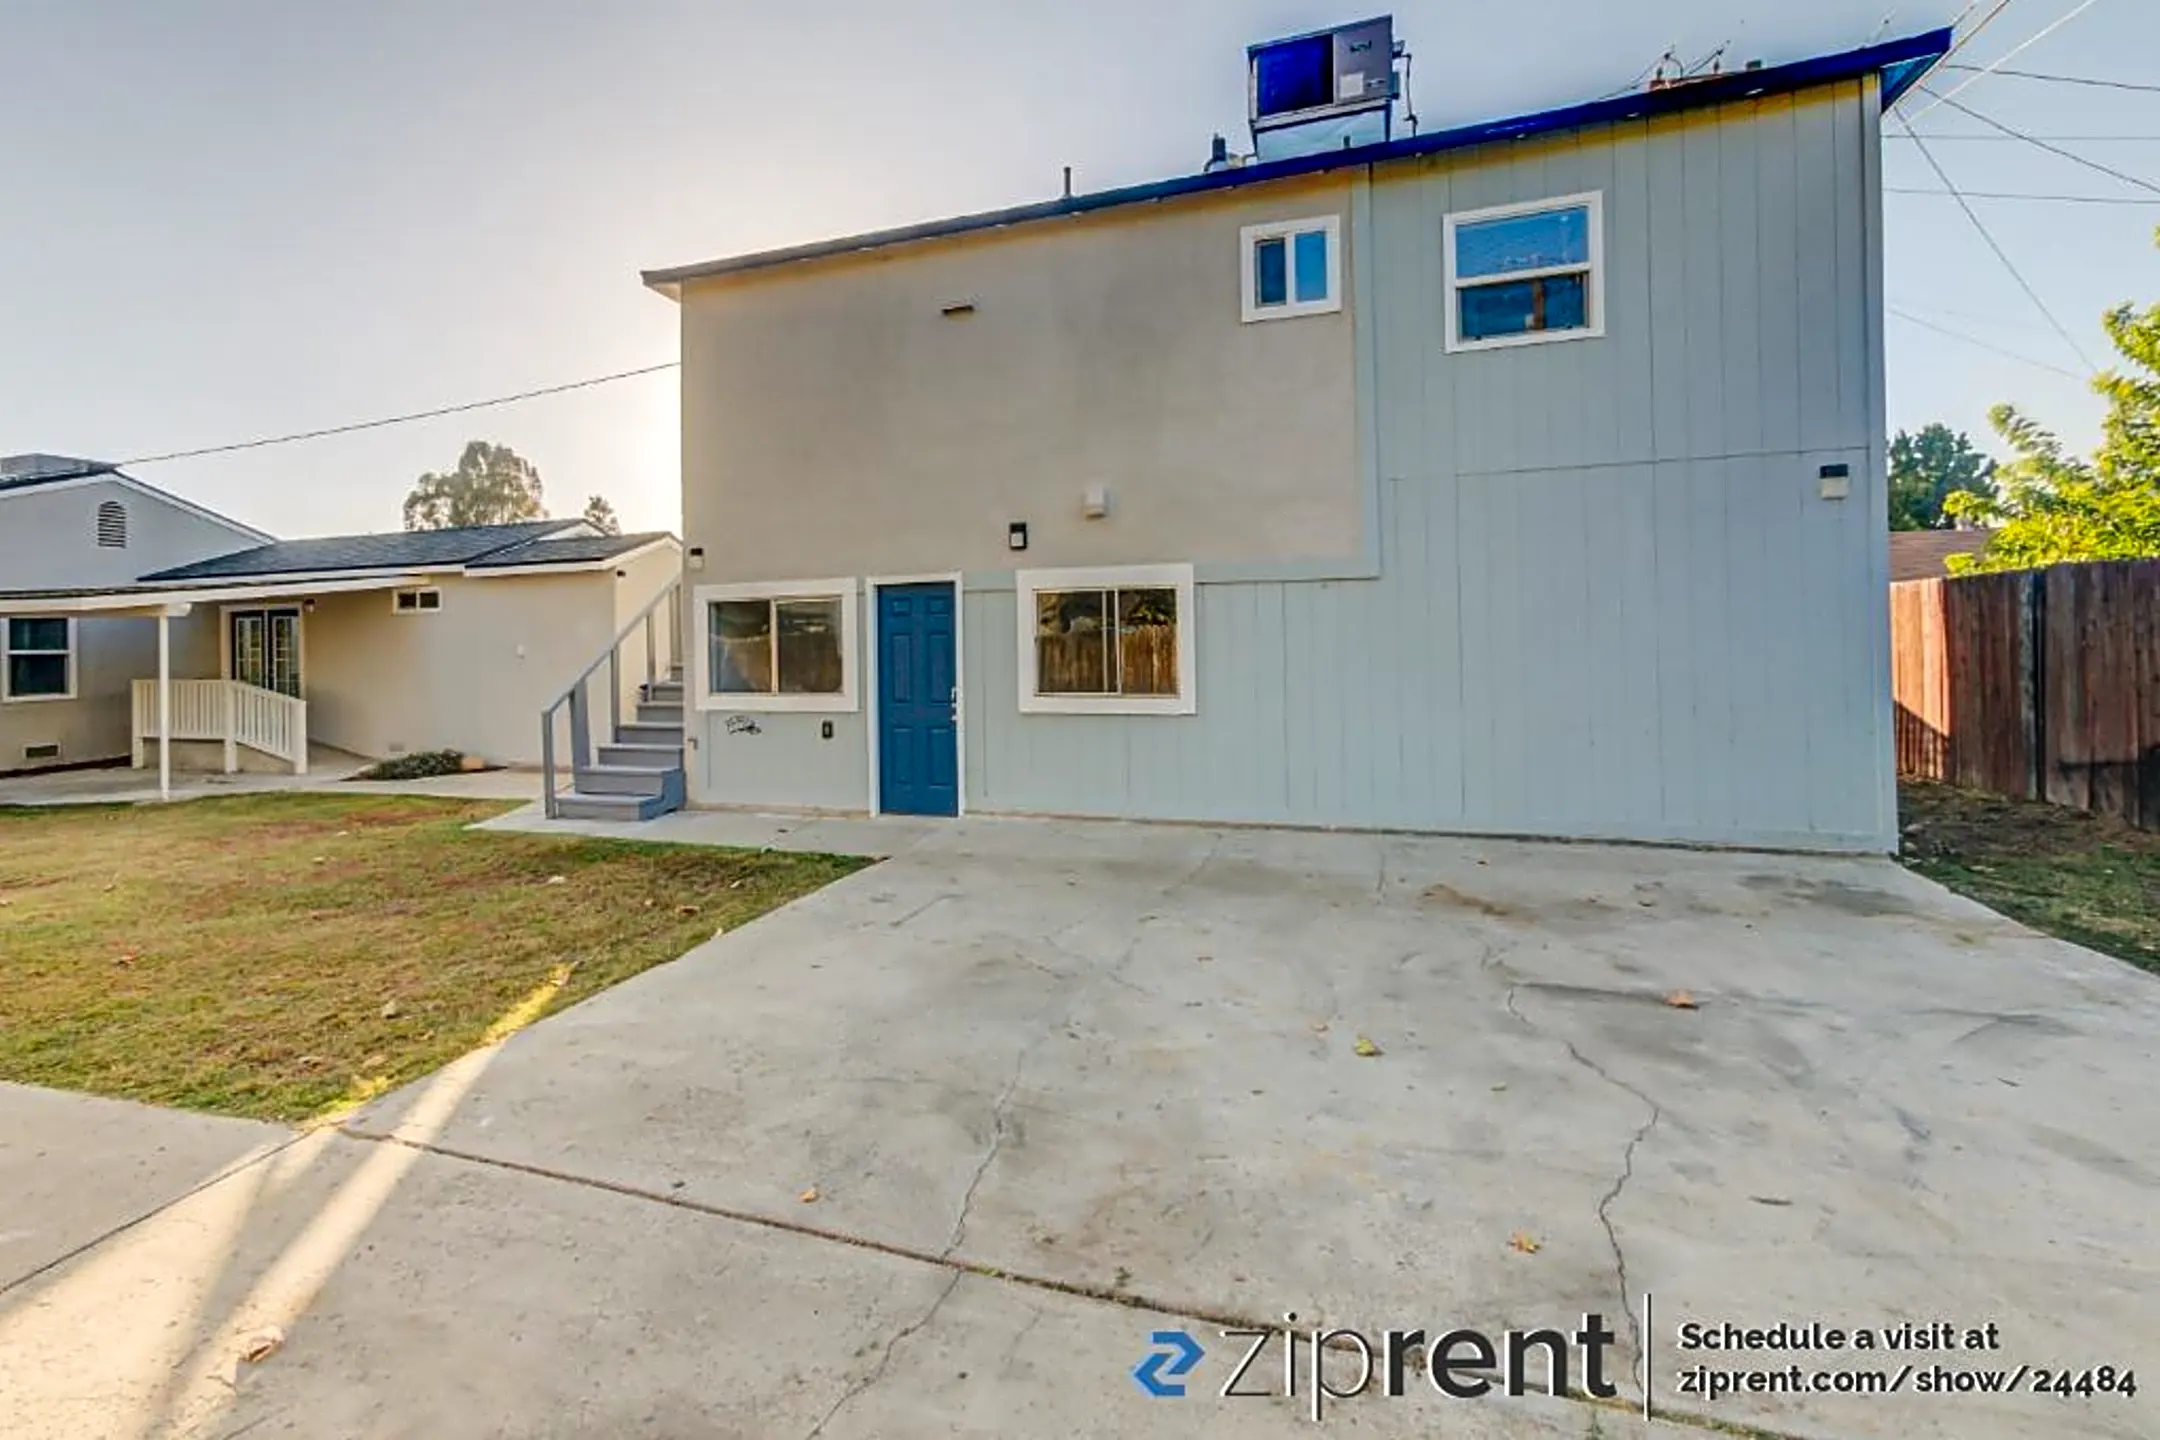 Building - 218 Arvin St, A - Bakersfield, CA